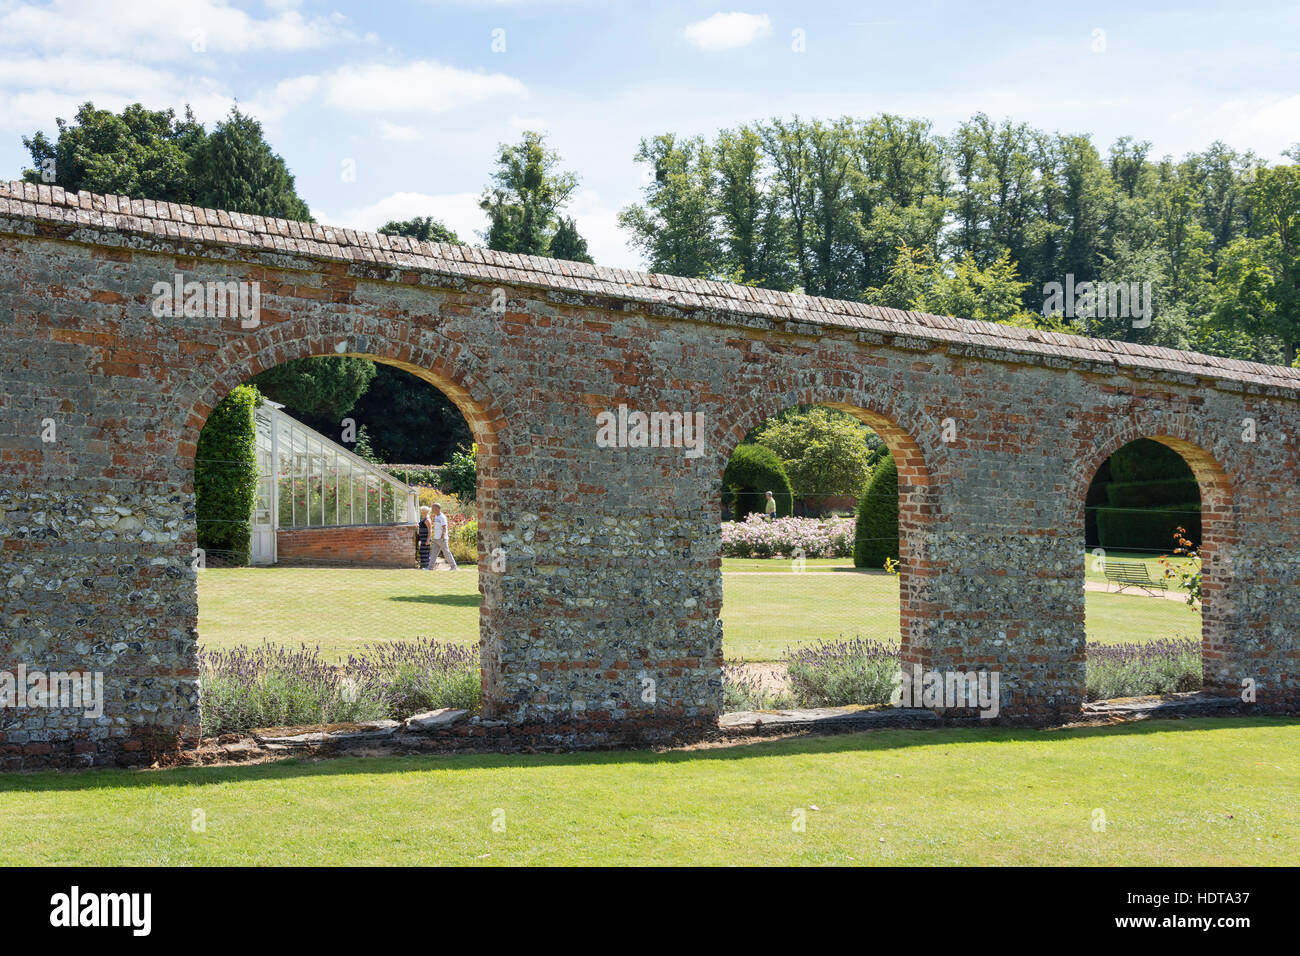 The Walled Monks Garden, Highclere Castle (Downton Abbey TV series), Highclere, Hampshire, England, United Kingdom Stock Photo